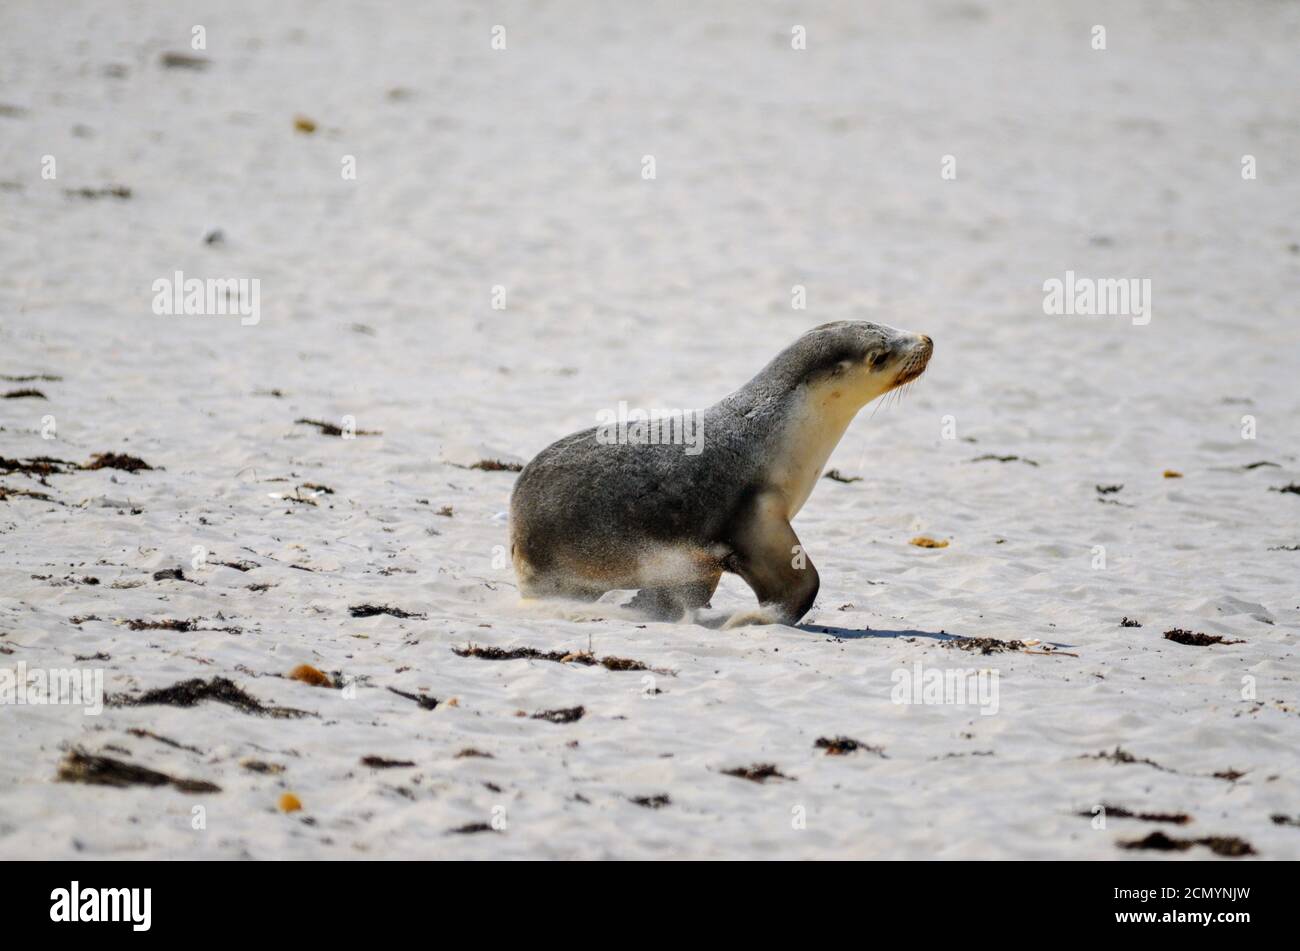 Single Young Baby Seal pup walking on sandy beach Stock Photo